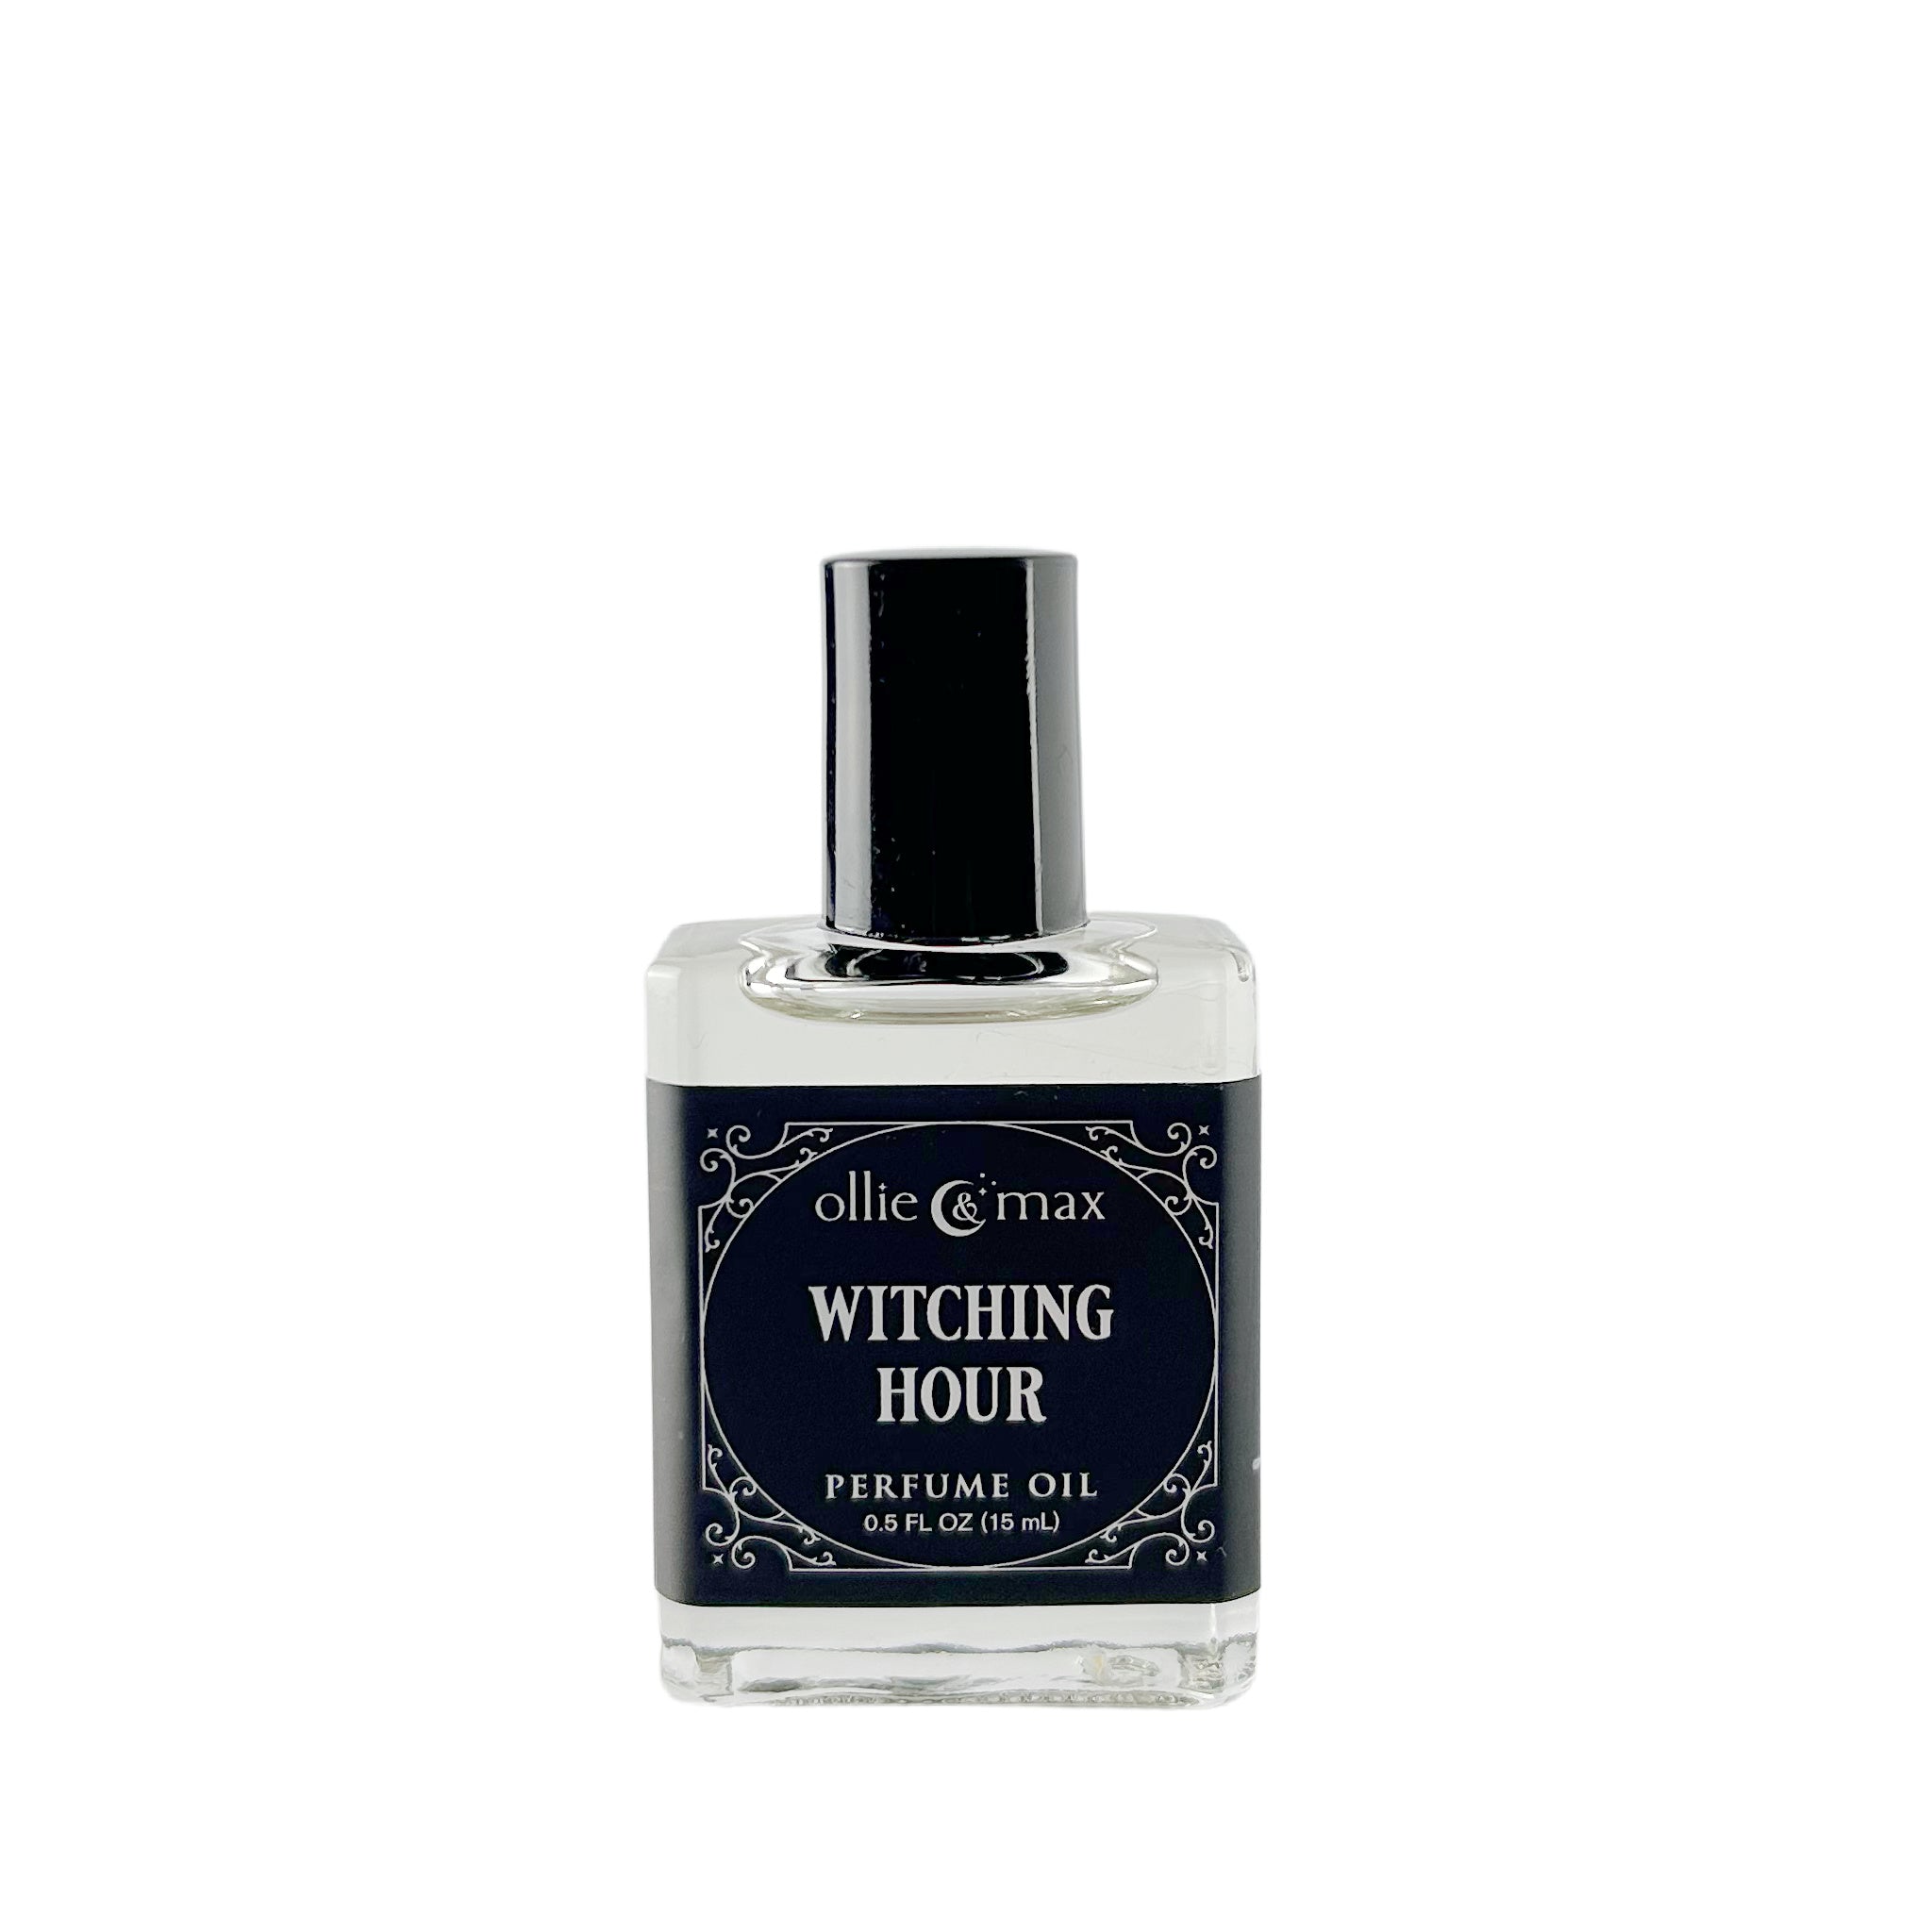 rectangle glass bottle with black cap. Witching Hour vegan perfume, 15ml